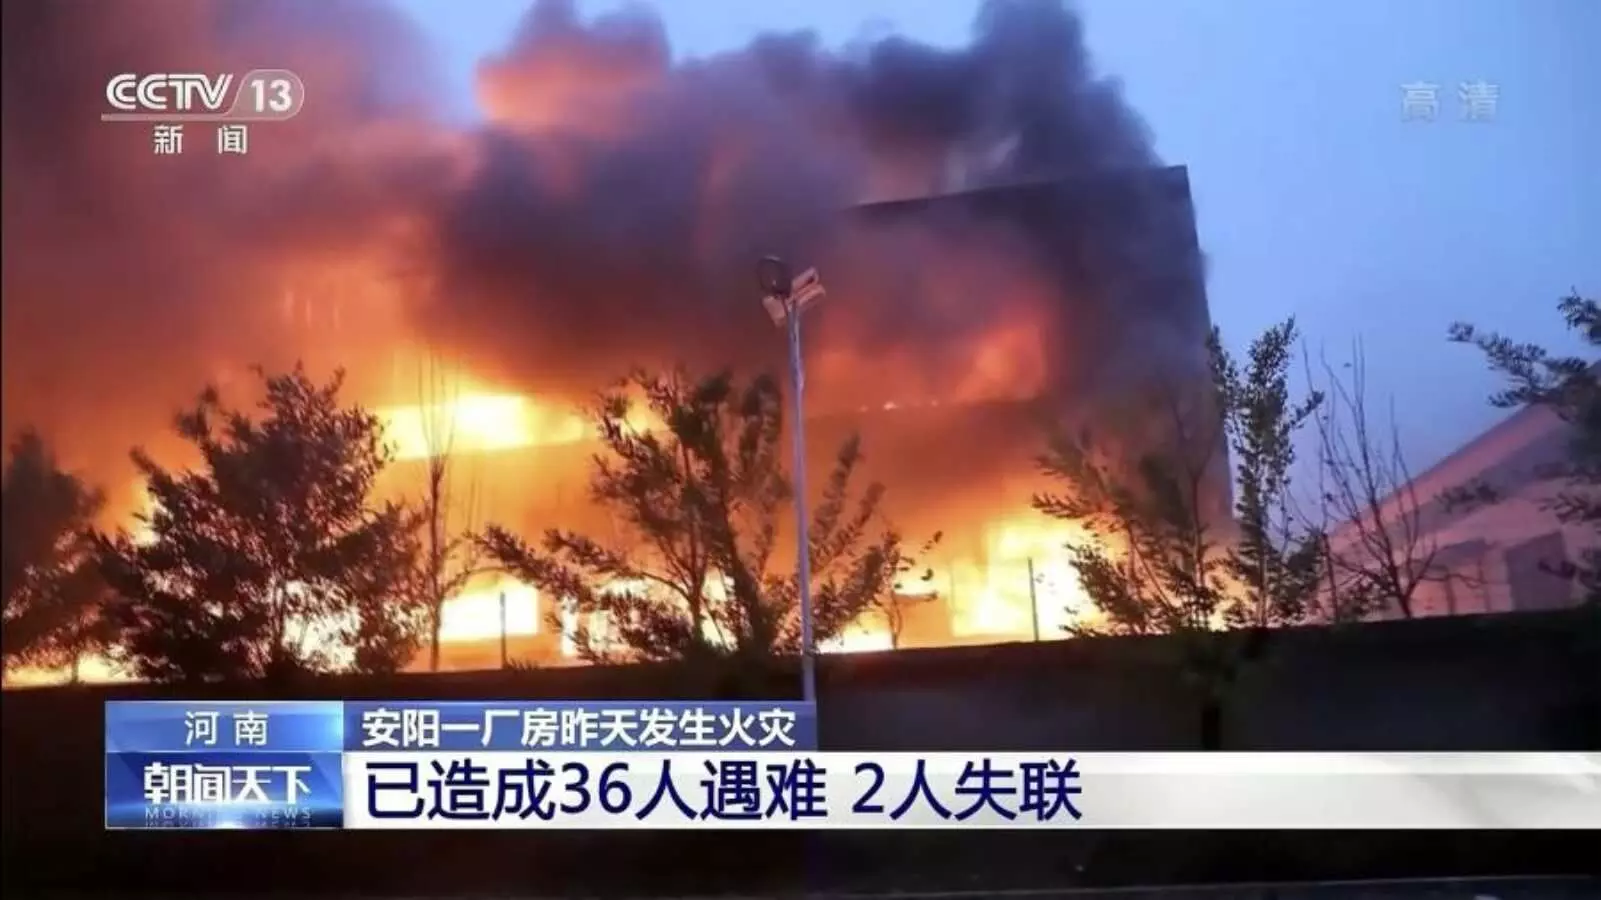 38 killed and two injured in massive fire broke out in china